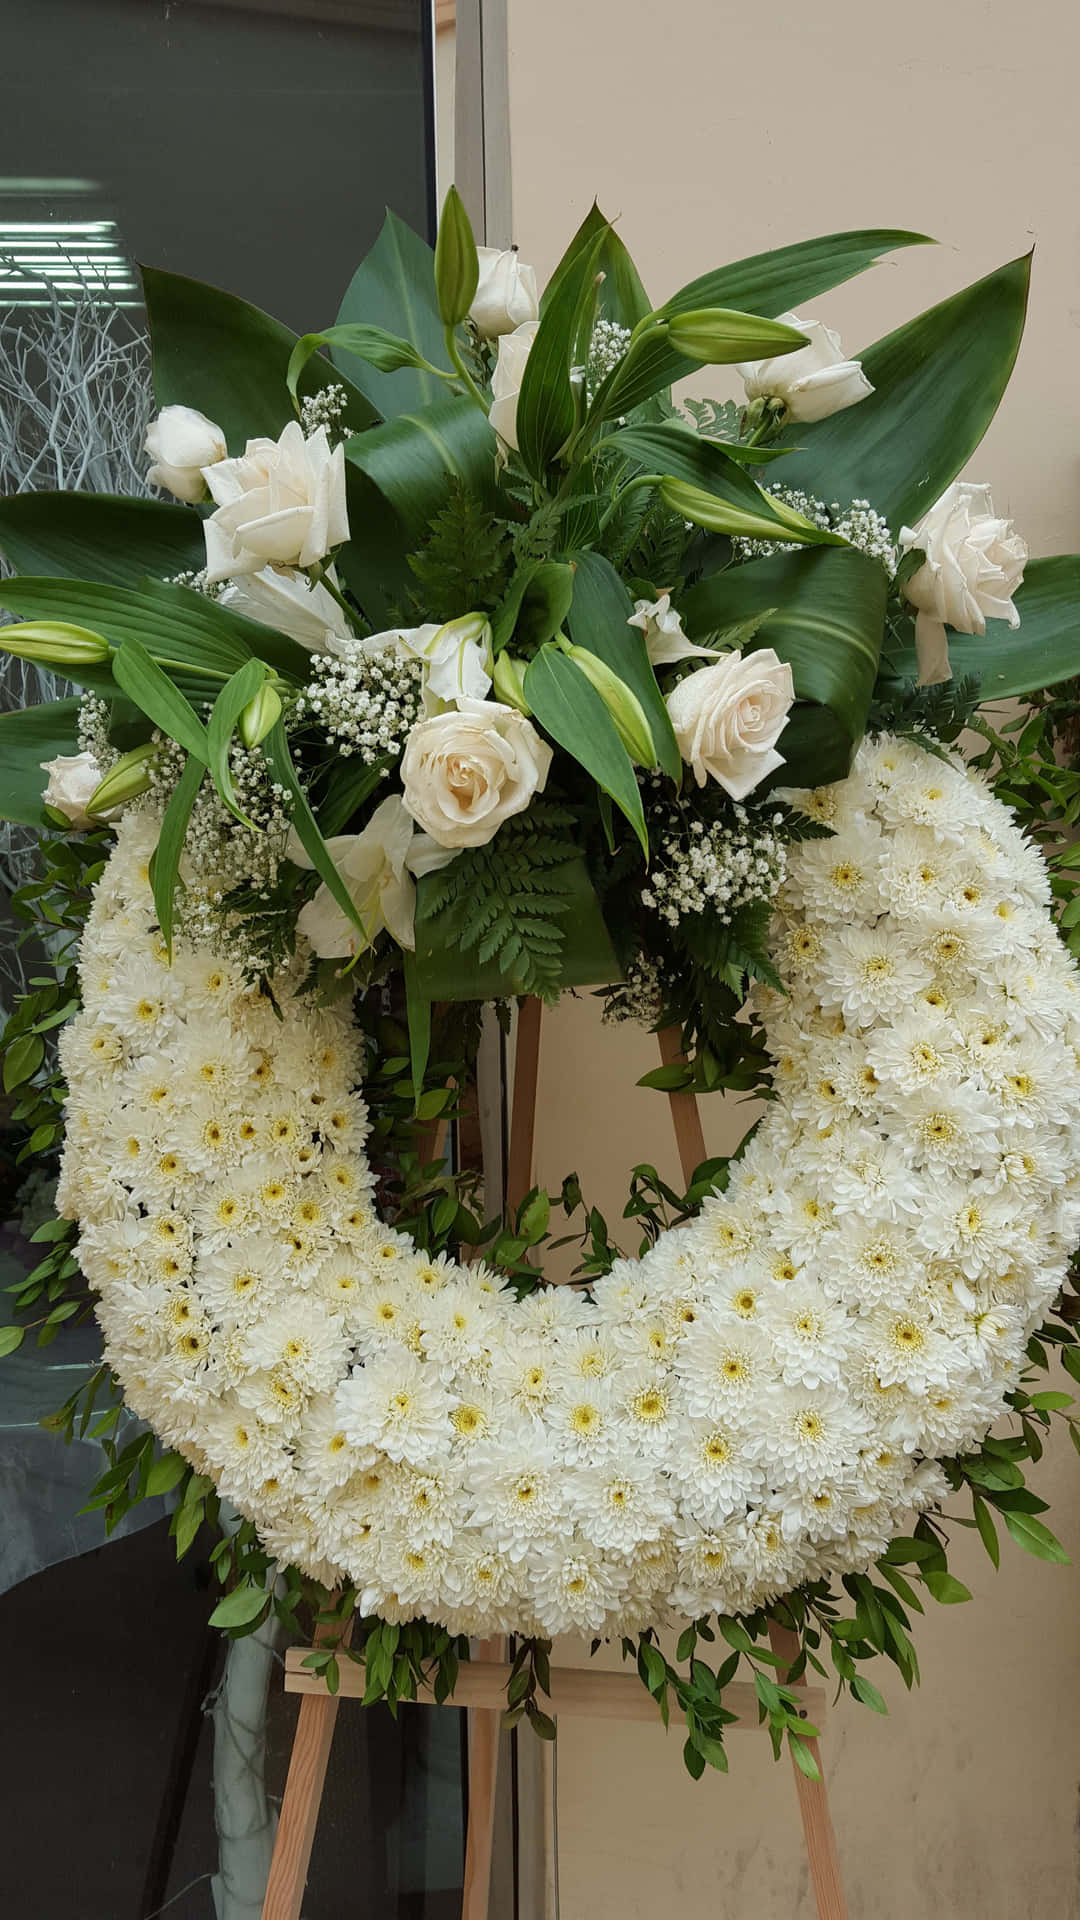 A beautiful funeral flower arrangement to commemorate your loved one and honor their memory.